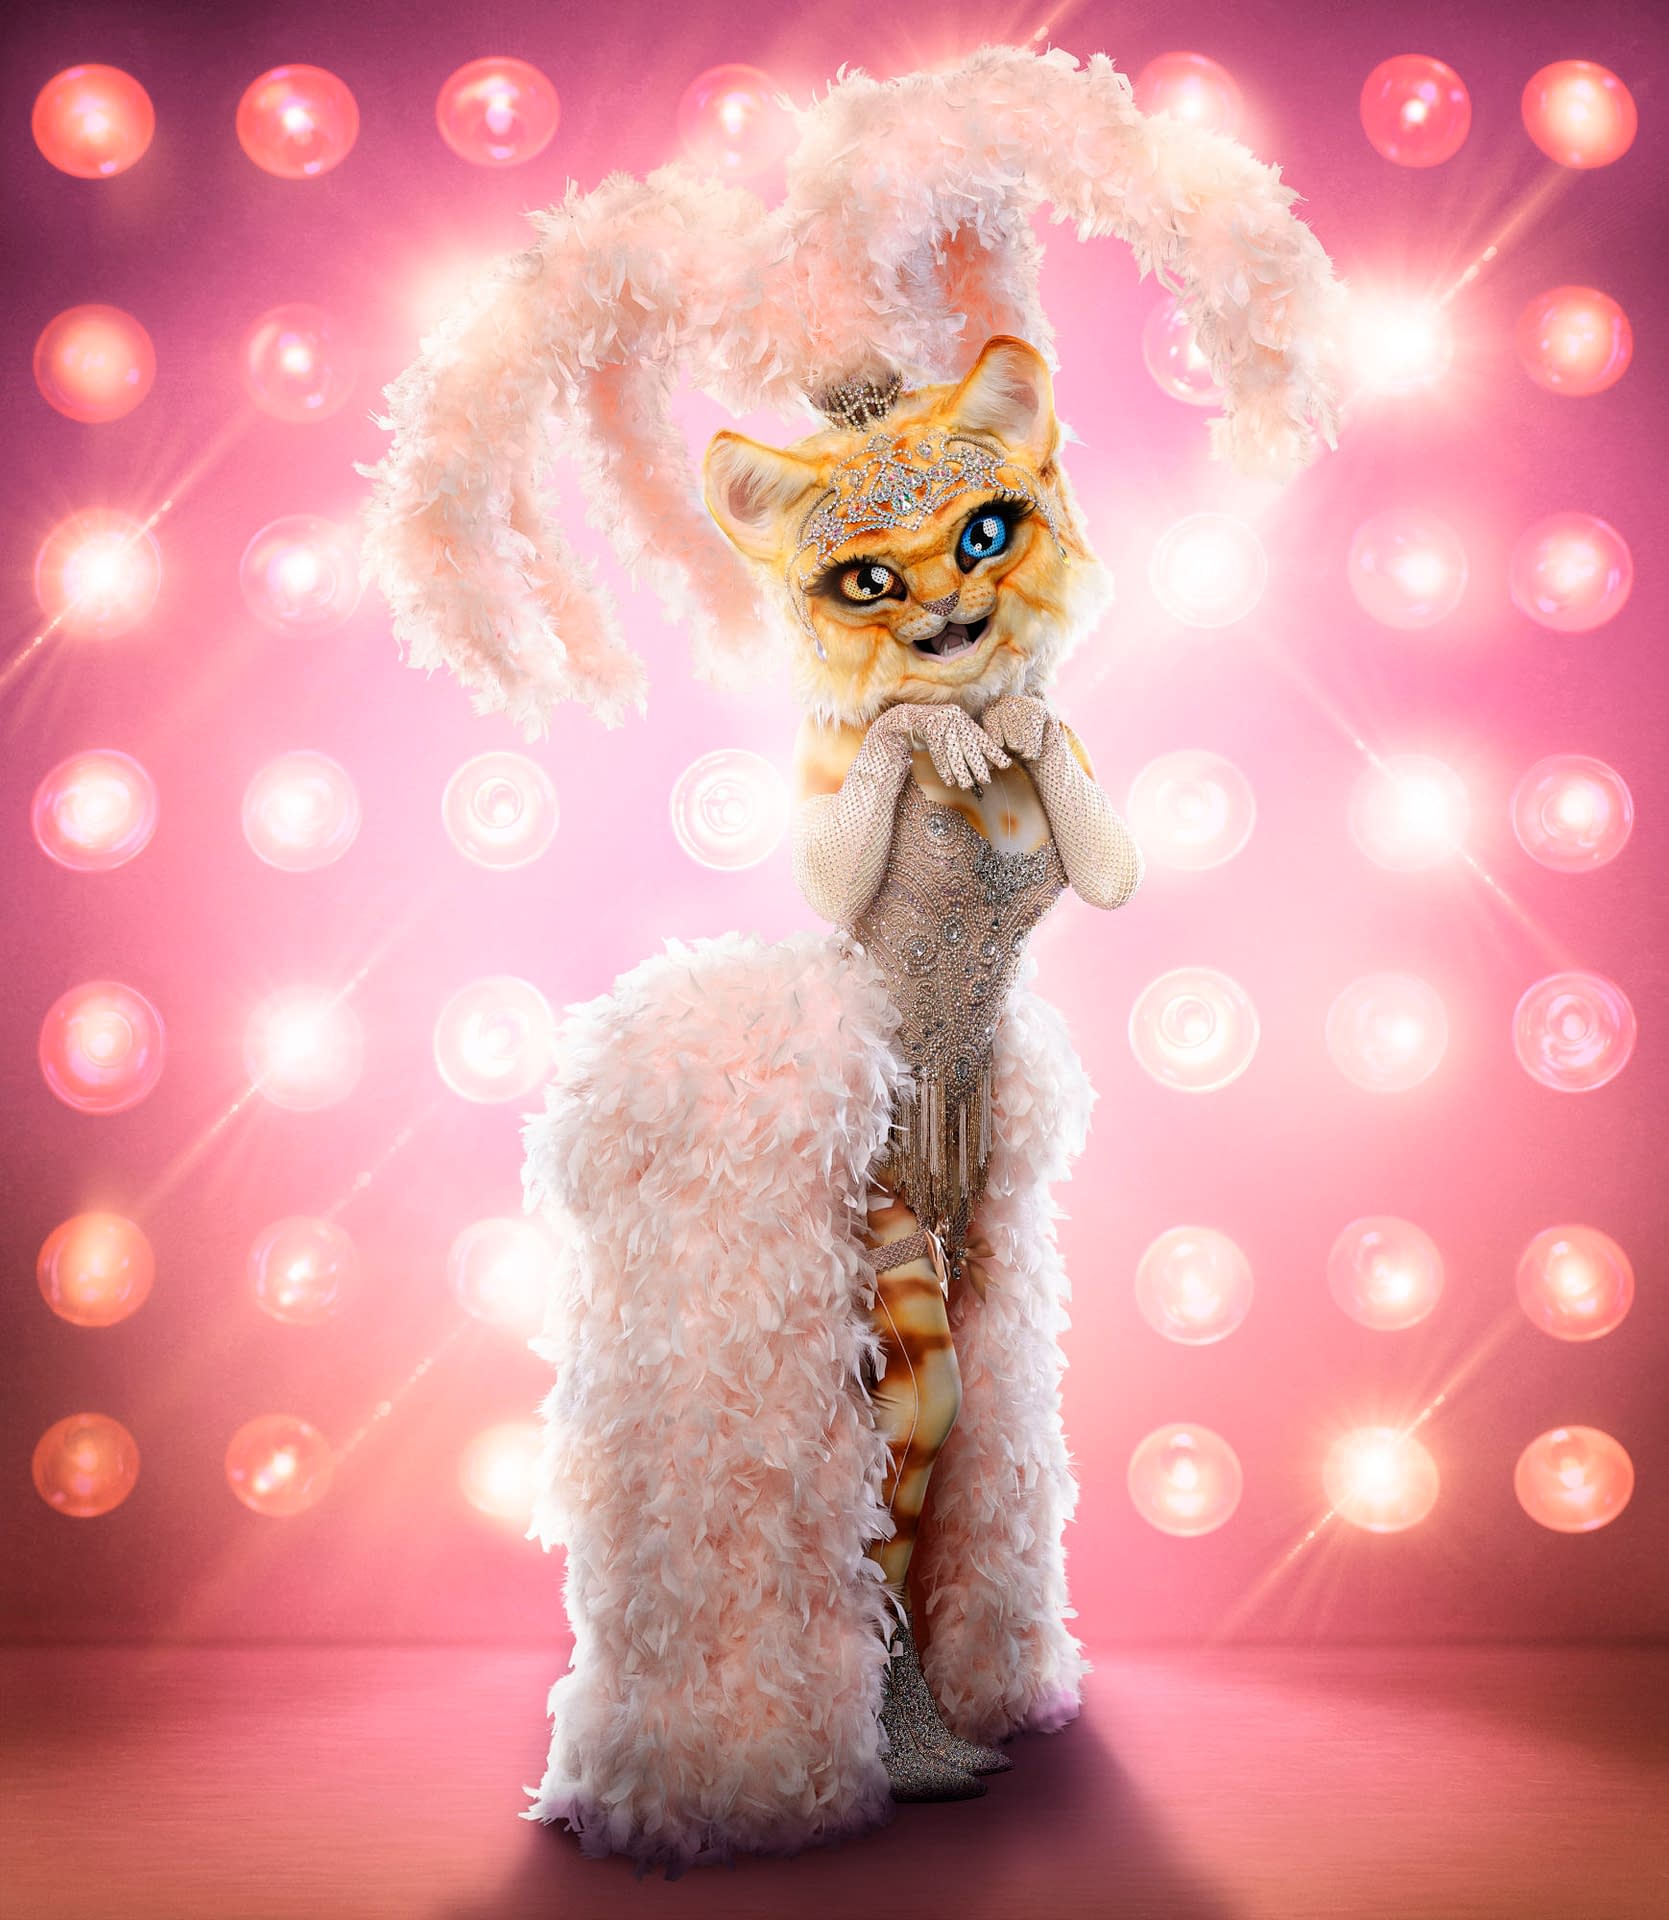 "The Masked Singer" Has Us "Super Bowl-ed" Over These Season 3 Masks [PREVIEW]